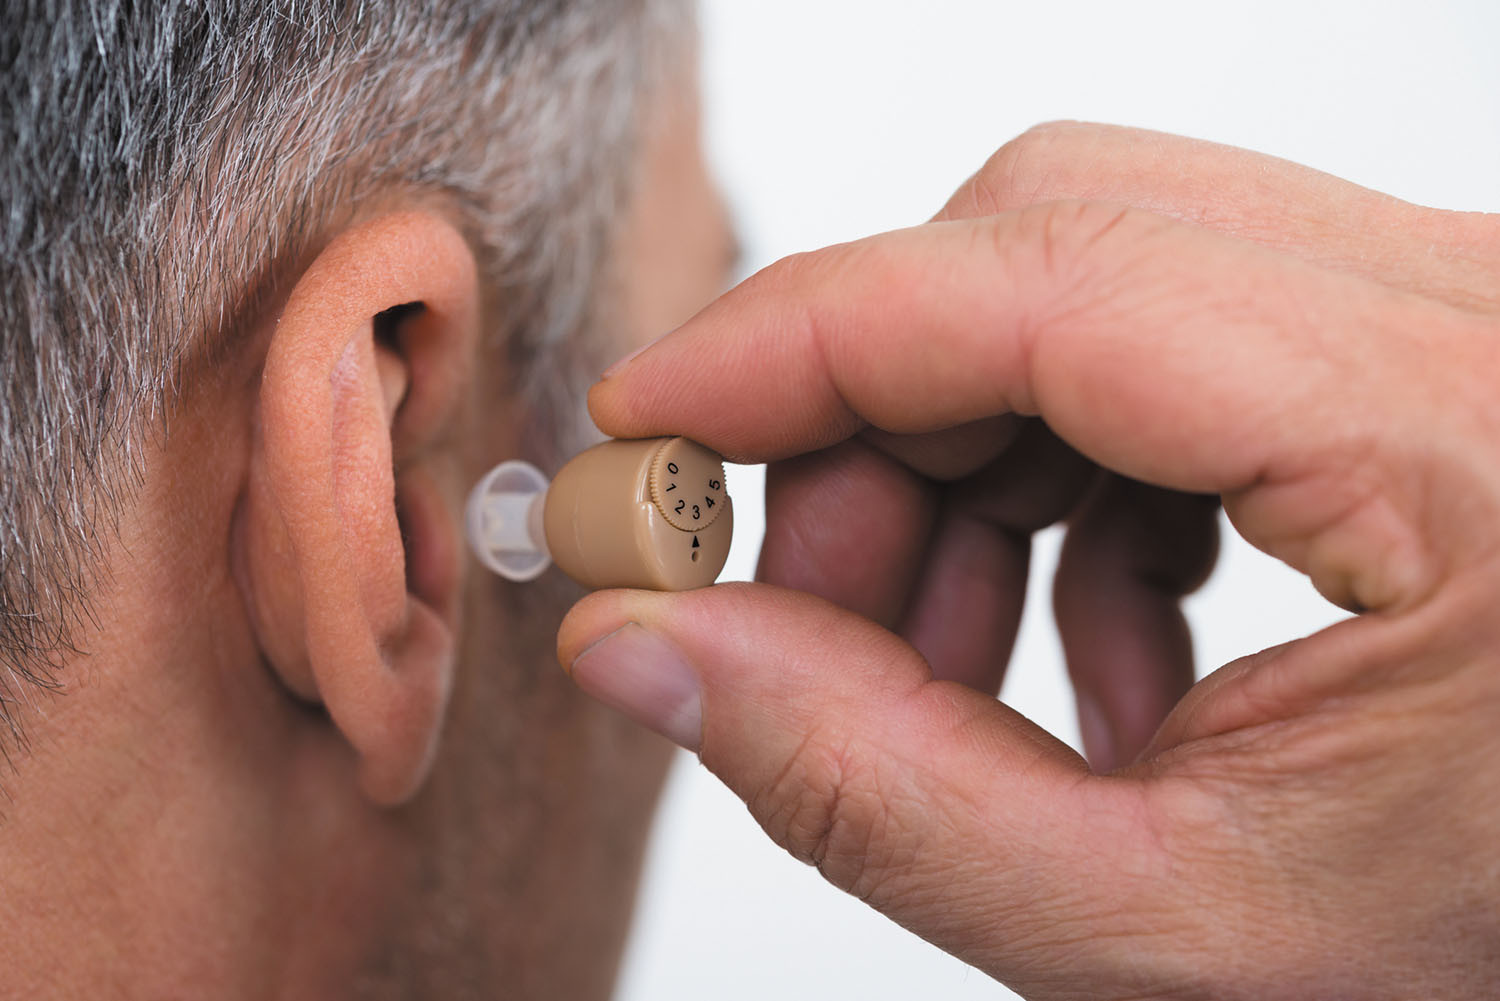 close-up photo of a man's head viewed from behind, he is inserting a hearing aid into his right ear